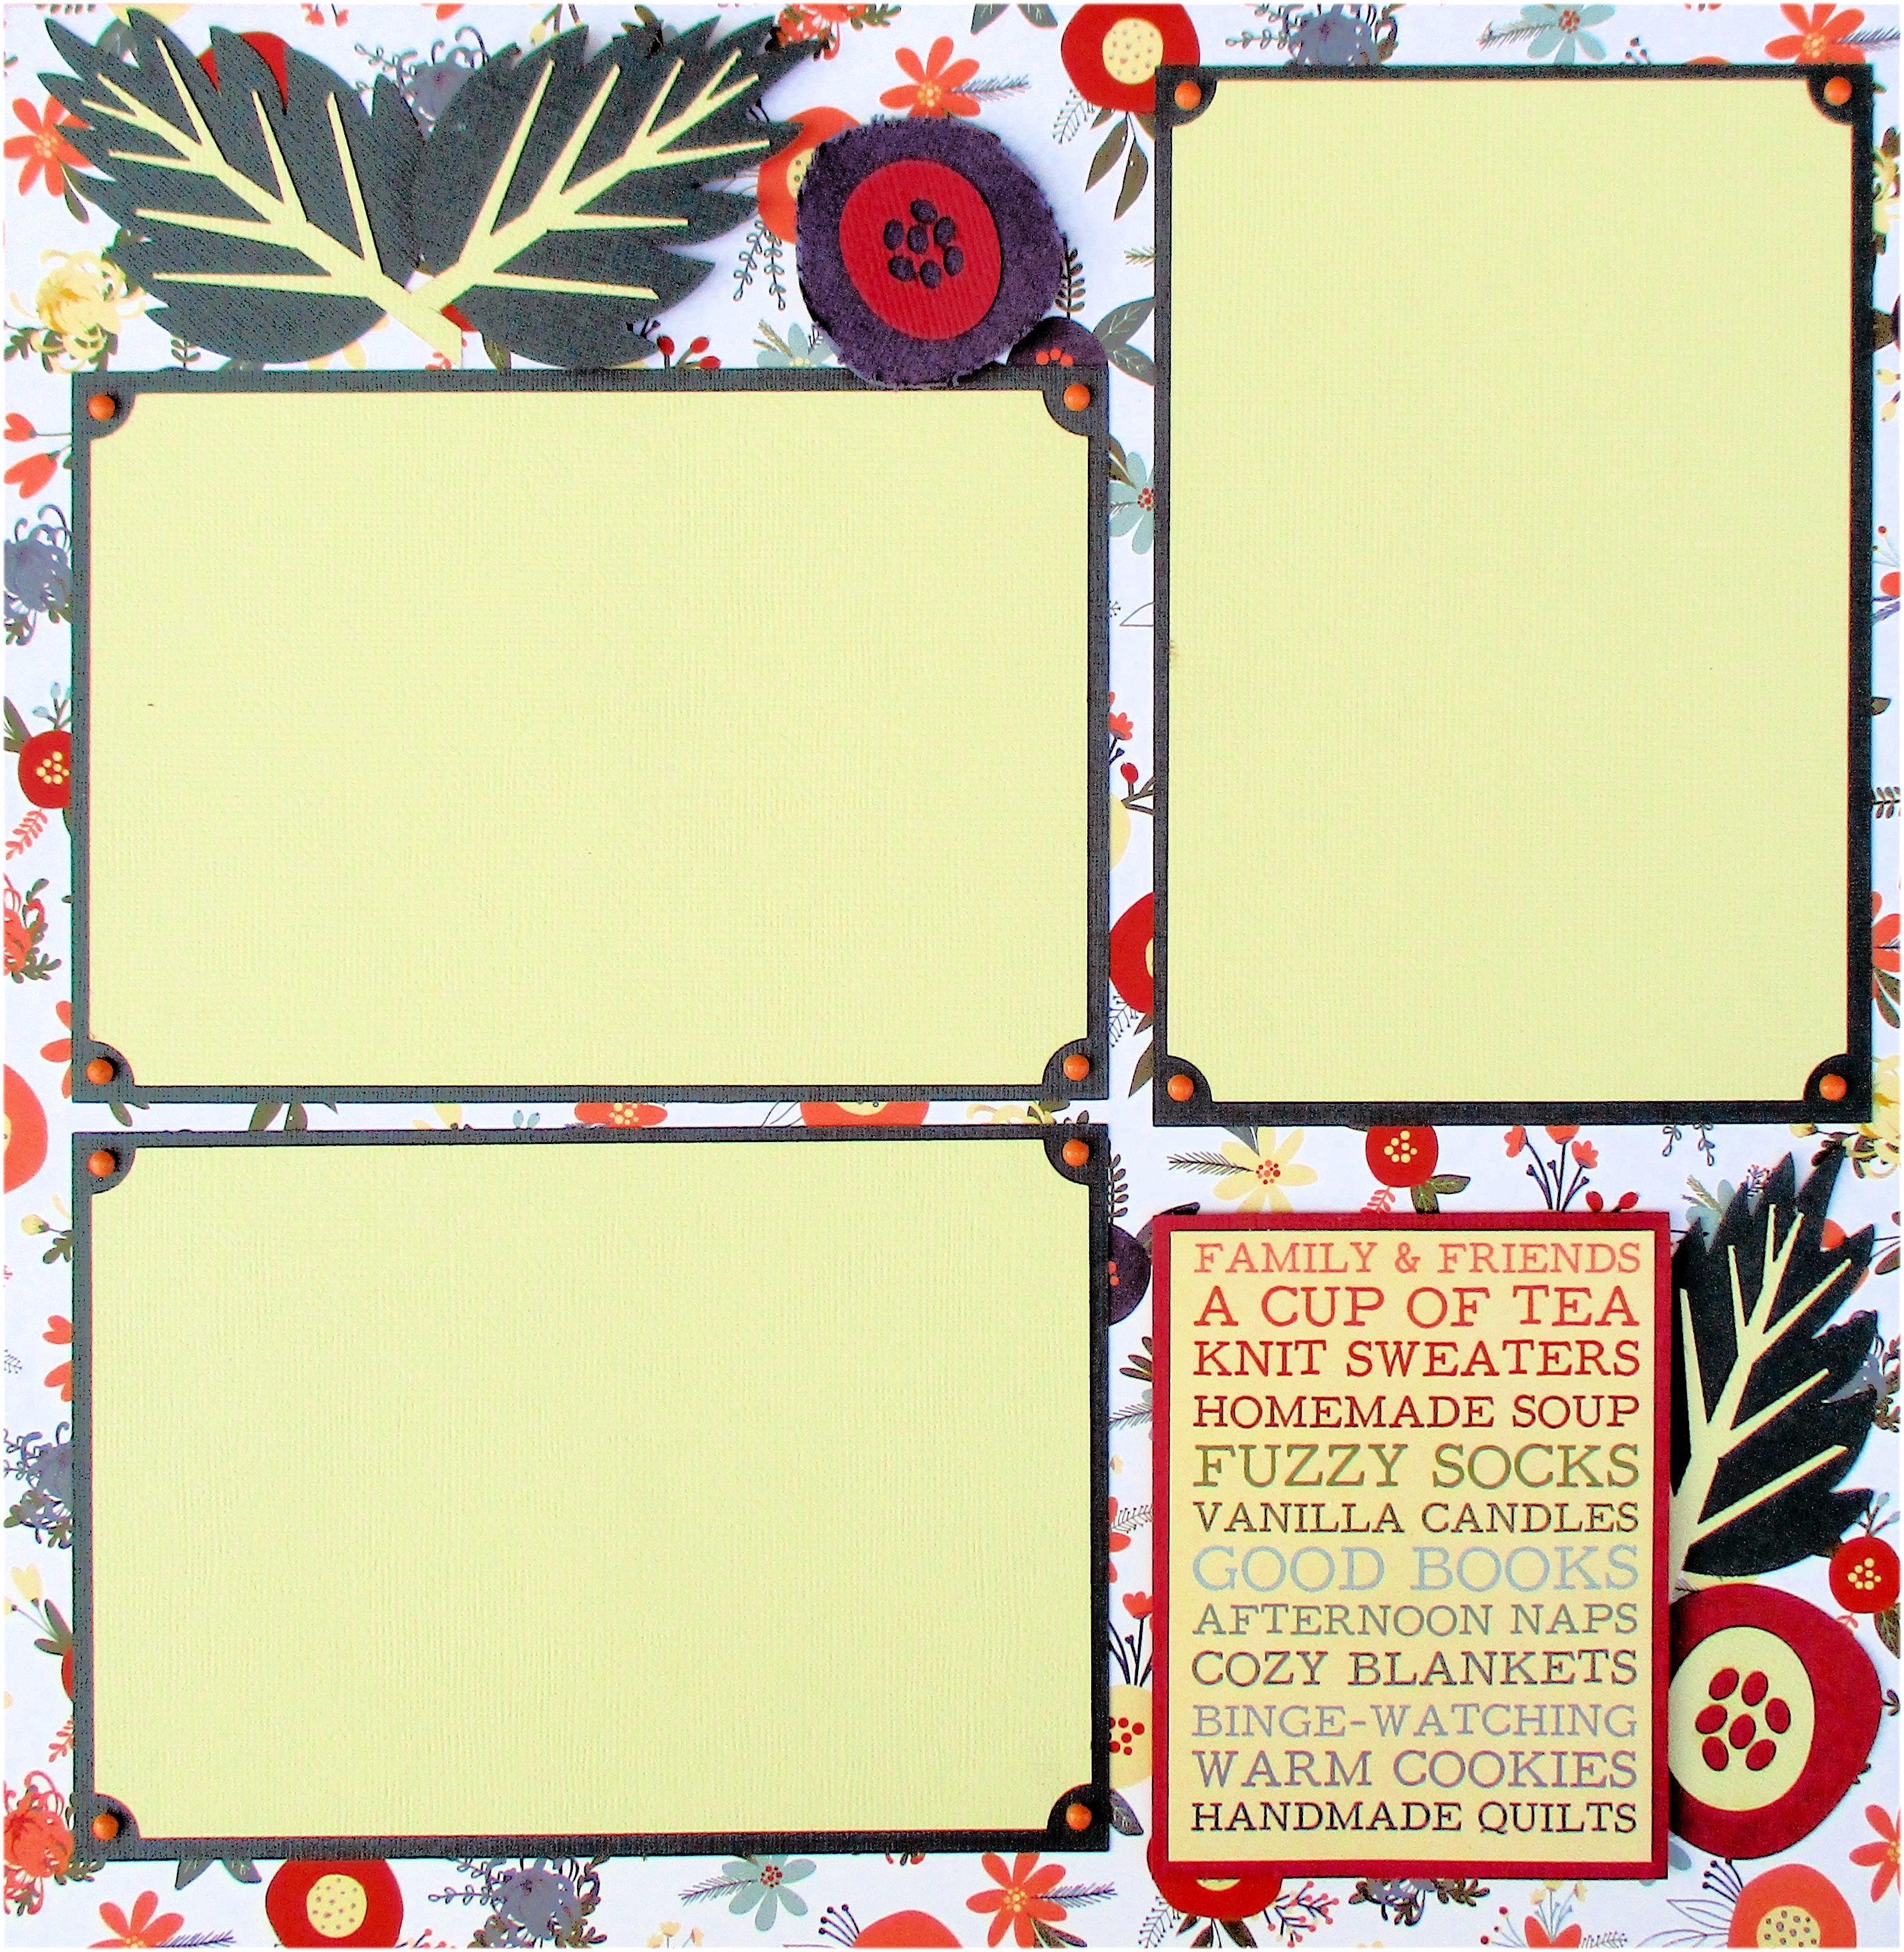 Fall Is In The Air Fully-Assembled, Premade 2 - 12 x 12 Page Scrapbook Premade by SSC Designs - Scrapbook Supply Companies